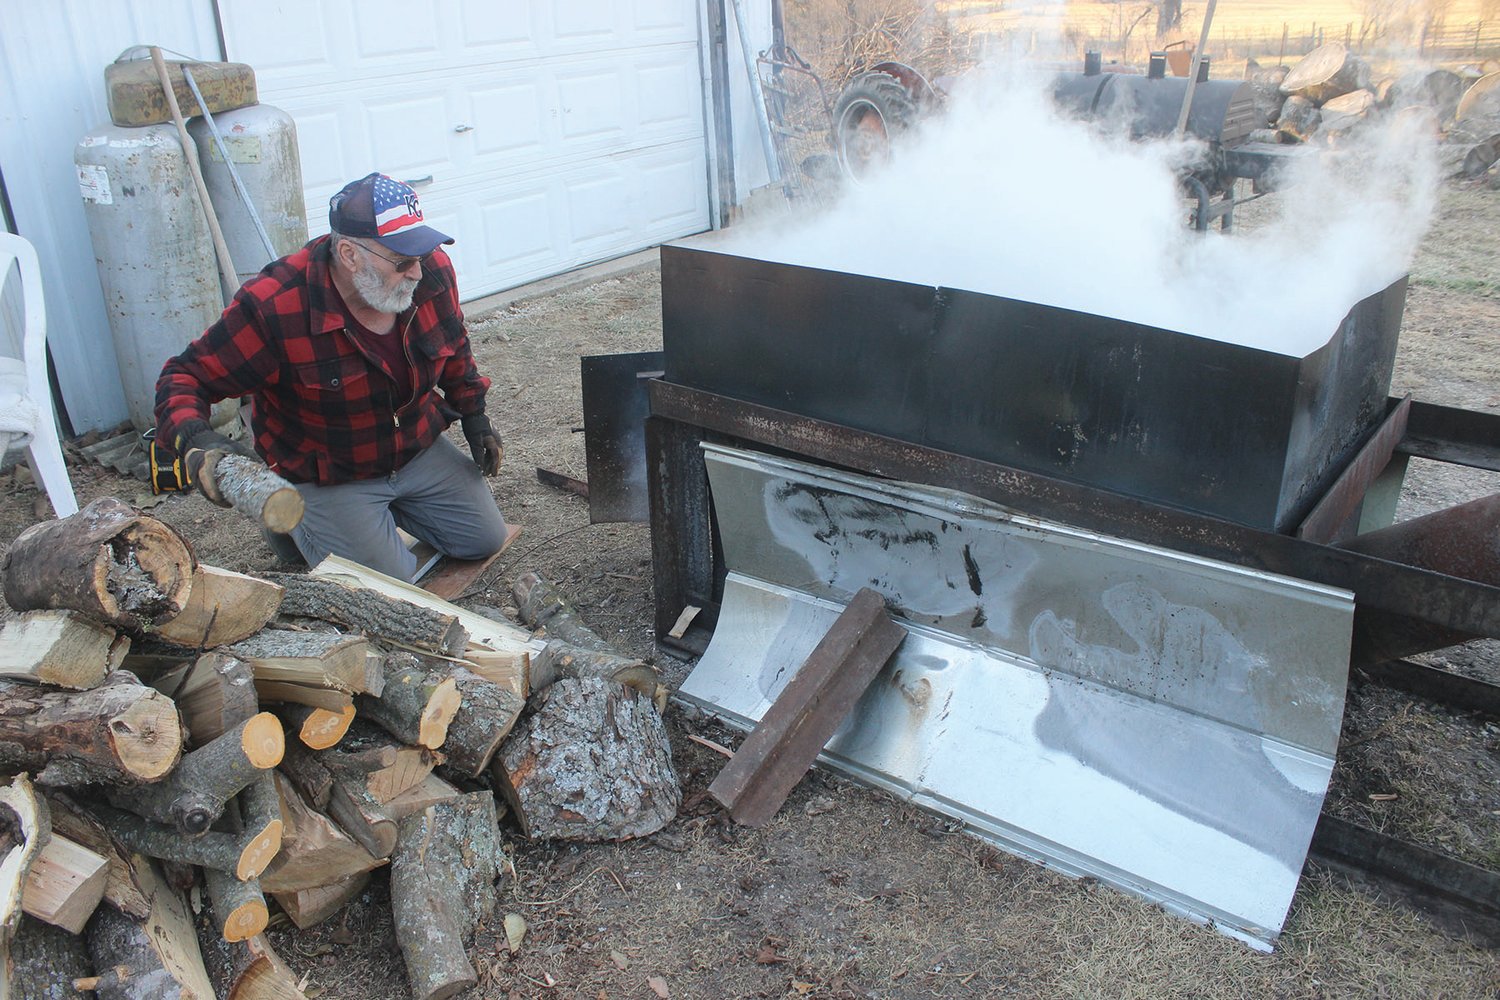 Allen Marrocco keeps the fire going as he cooks his sap with the goal of it eventually becoming maple syrup. He says the key is gathering sap and boiling it down with a focus on temperatures.